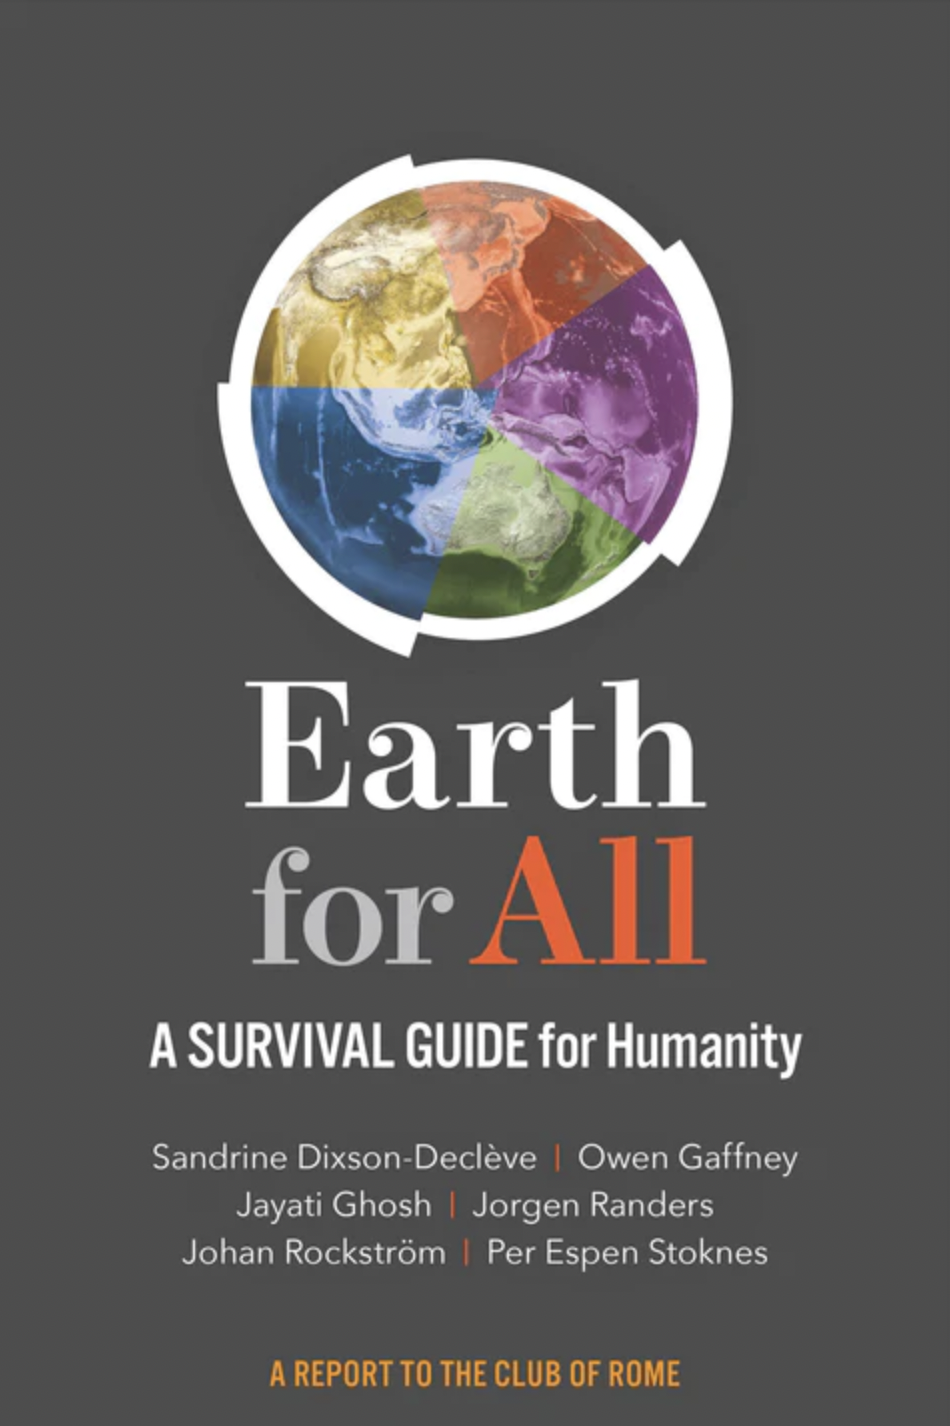 COMING SOON: Earth for all – A survival guide to humanity